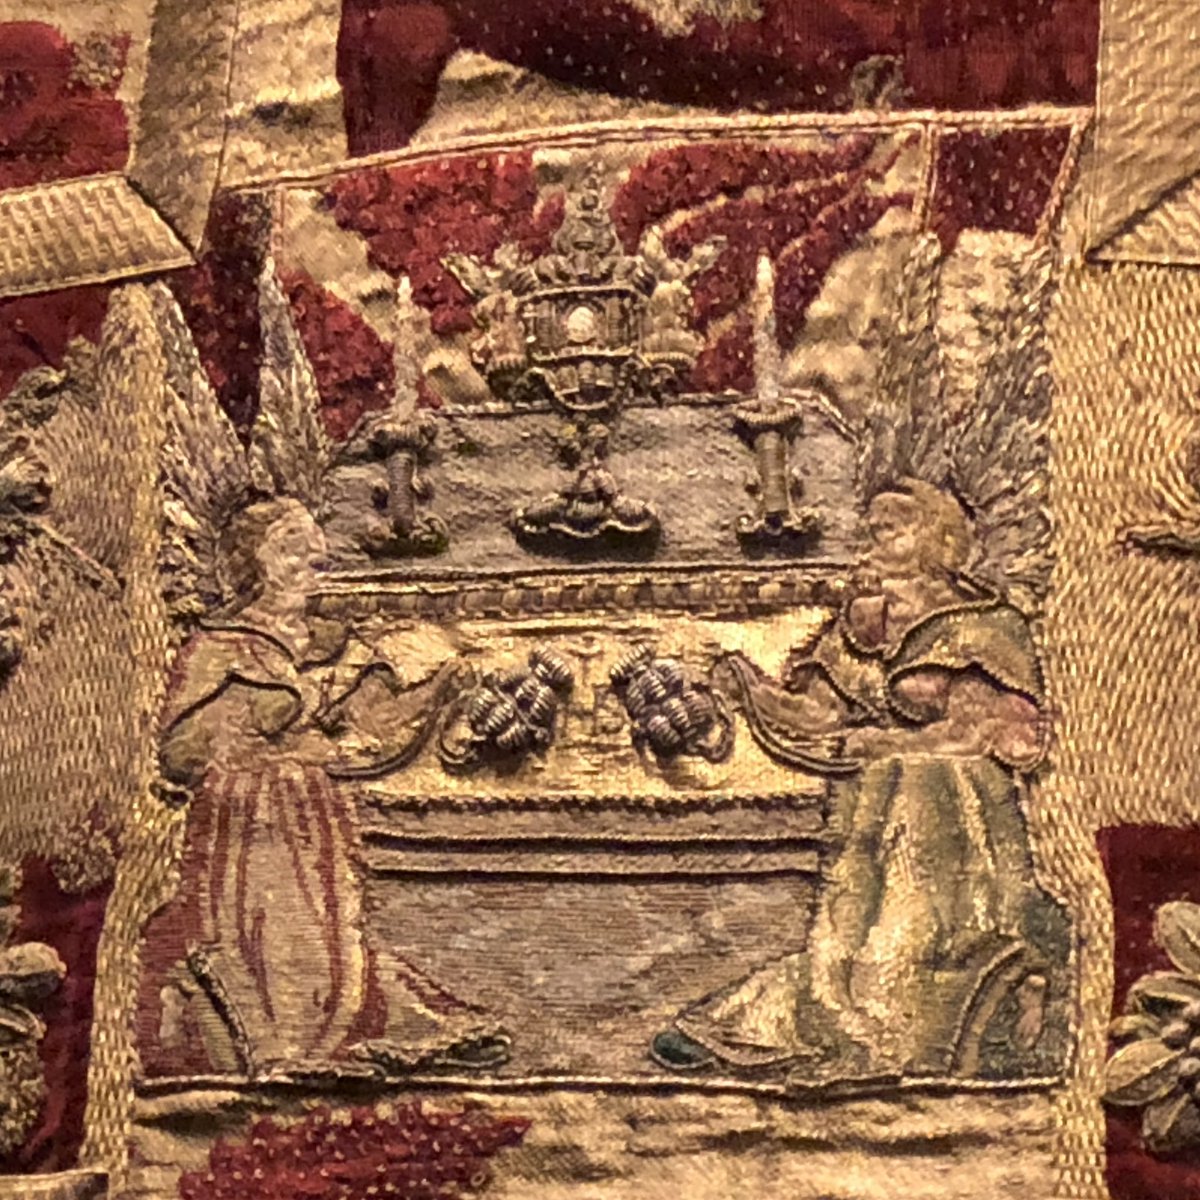 Amazing stitchwork from the Stonyhurst vestments Henry VIII in 1520 to took to the Field of Cloth of Gold. 

From my 2021 visit to the Gold and Glory exhibition at Hampton Court Palace 

#textiletuesday #TudorTuesday #embroidery